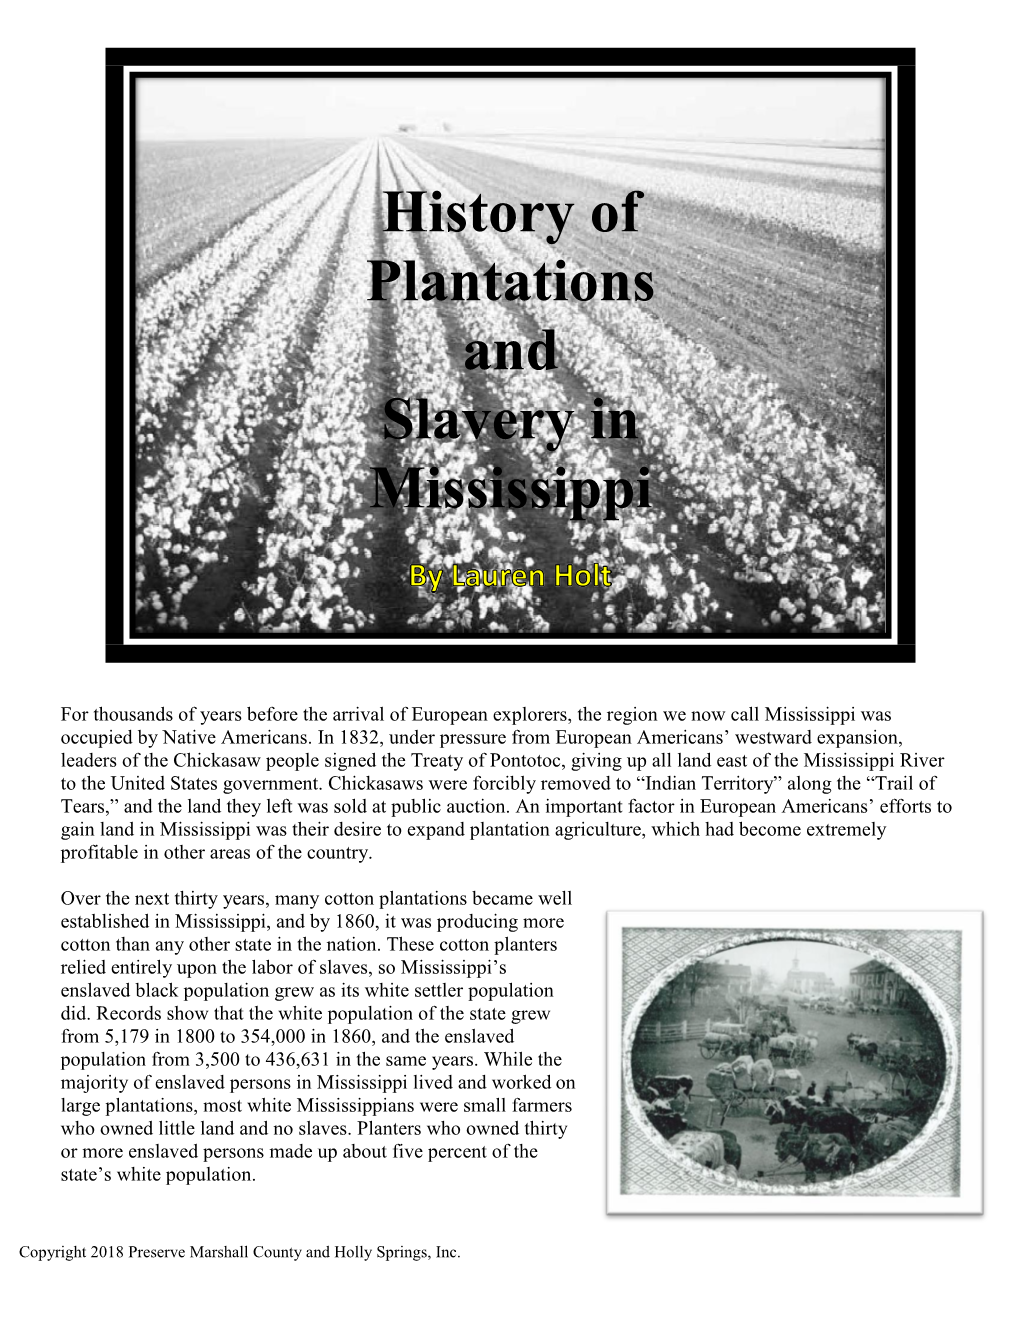 History of Plantations and Slavery in Mississippi